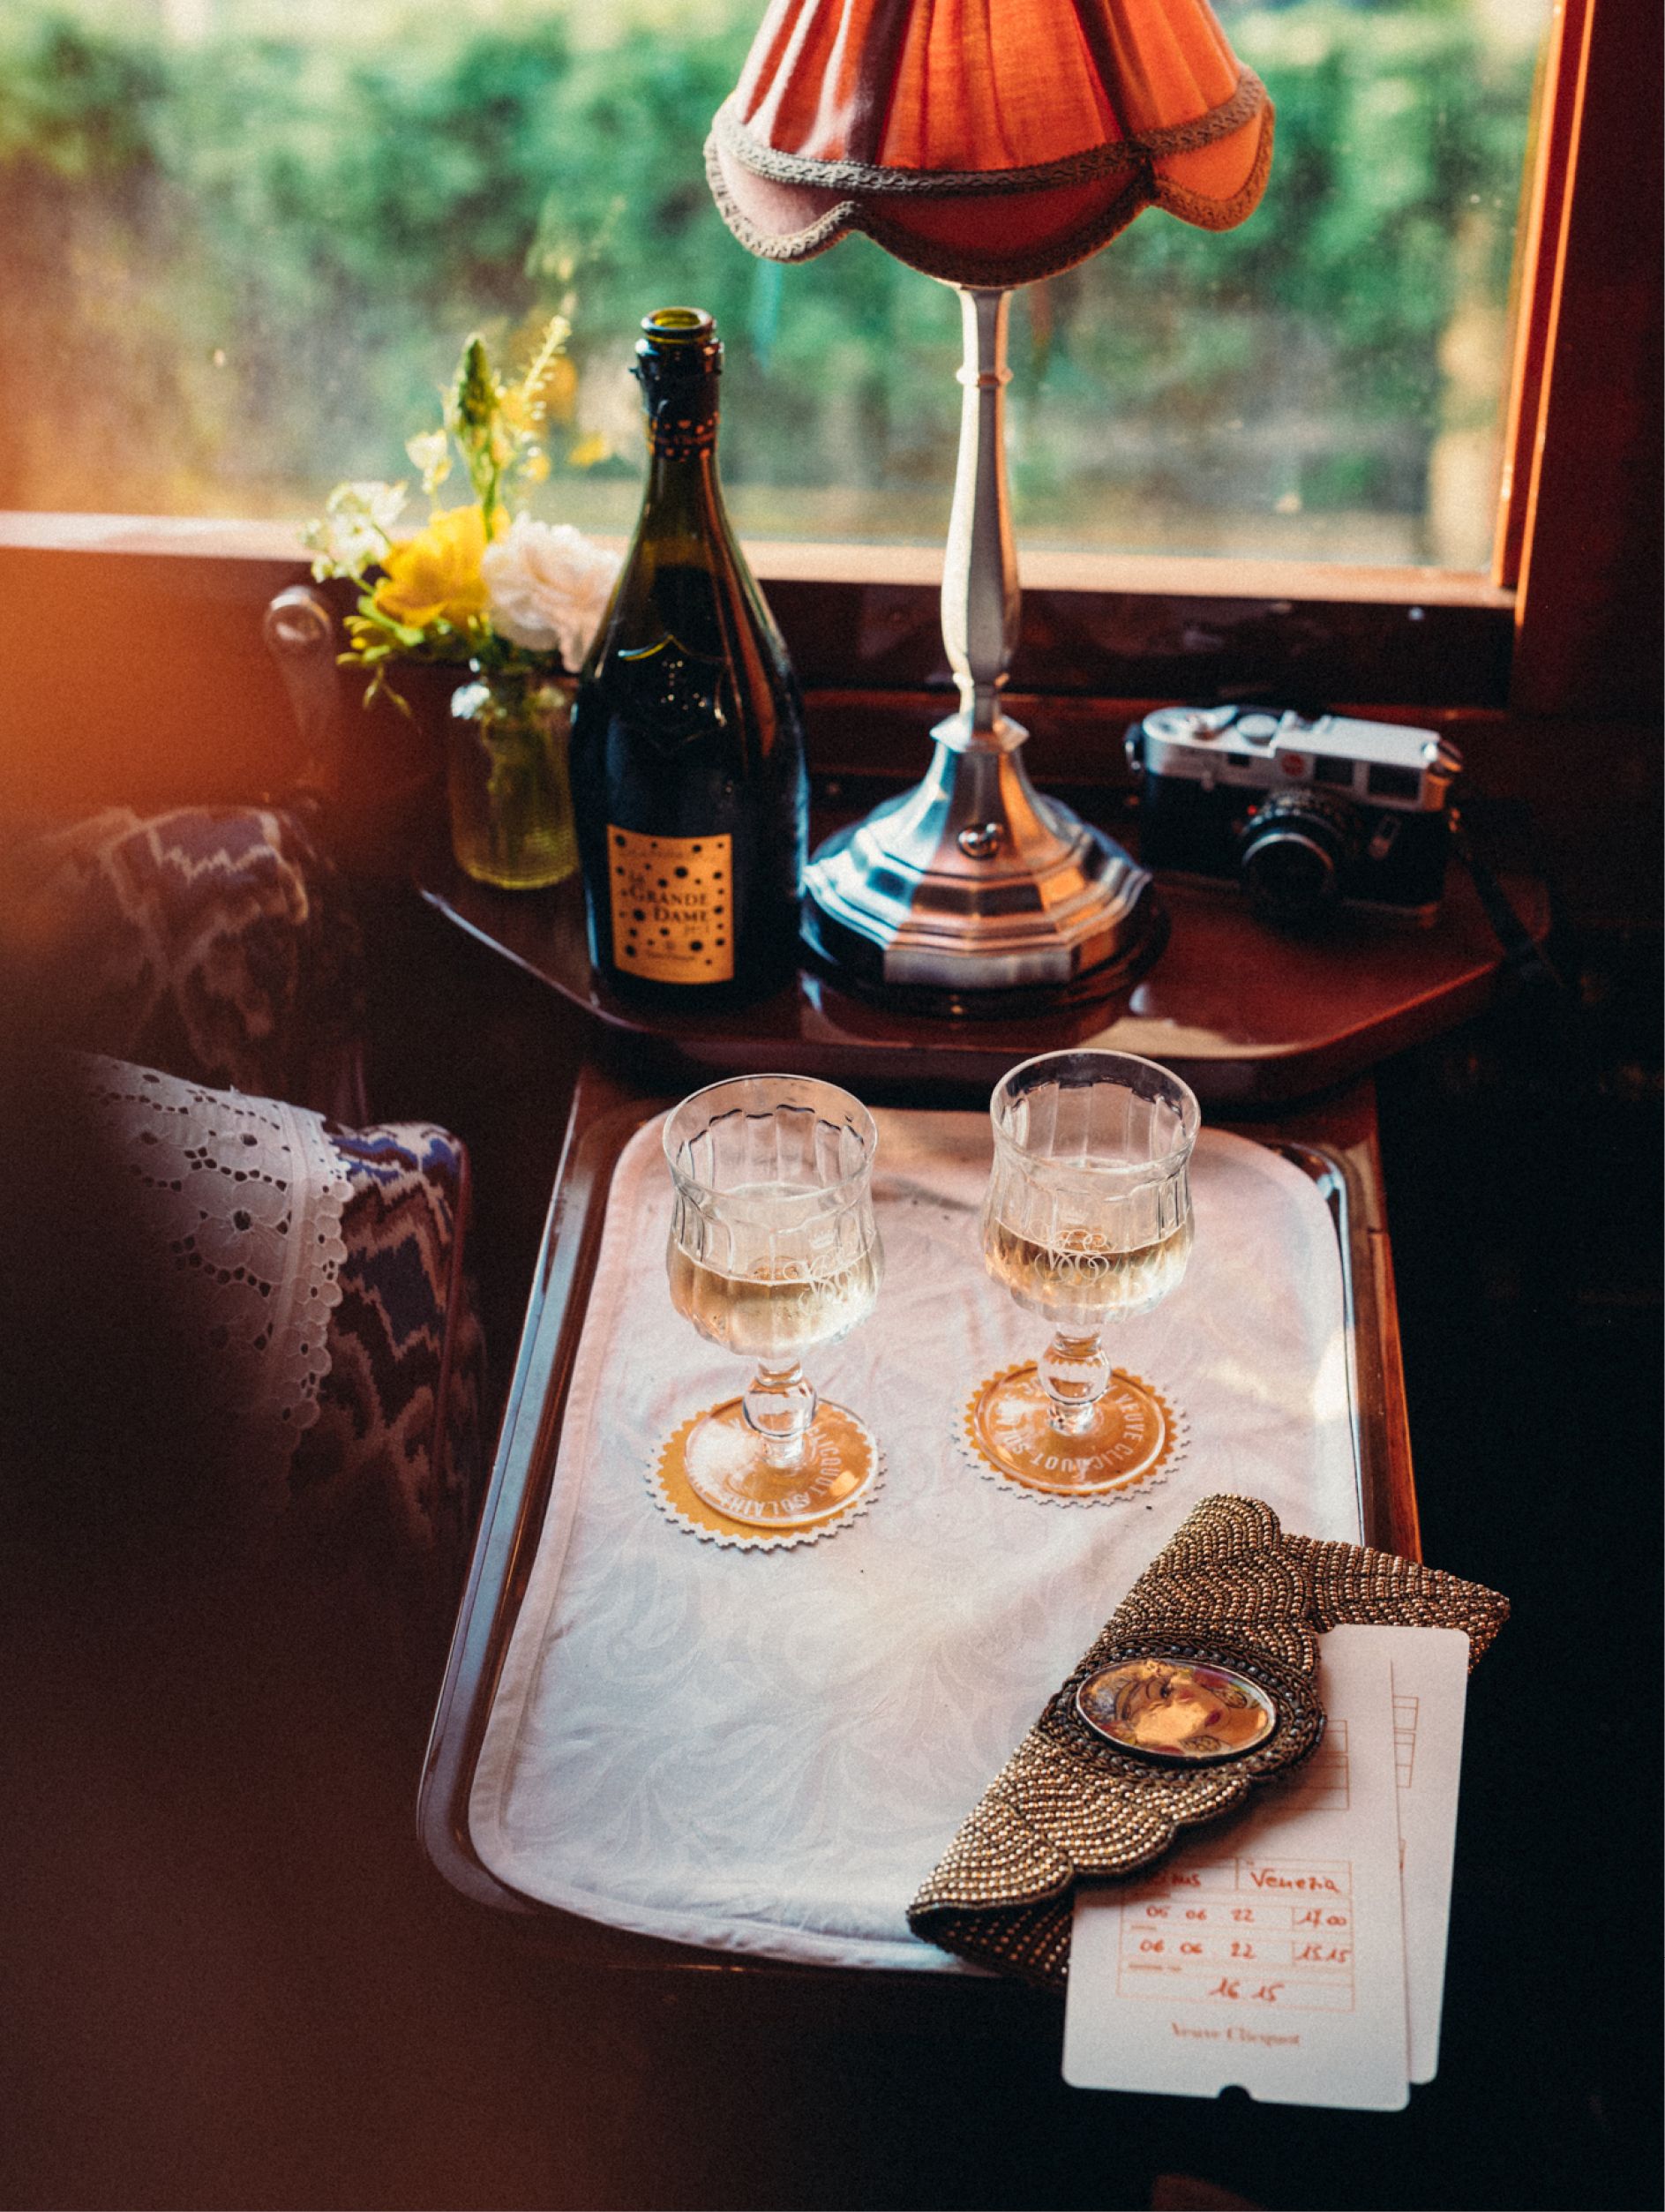 Veuve Clicquot's Solaire Journeys include world-class dining and fine champagne from the house